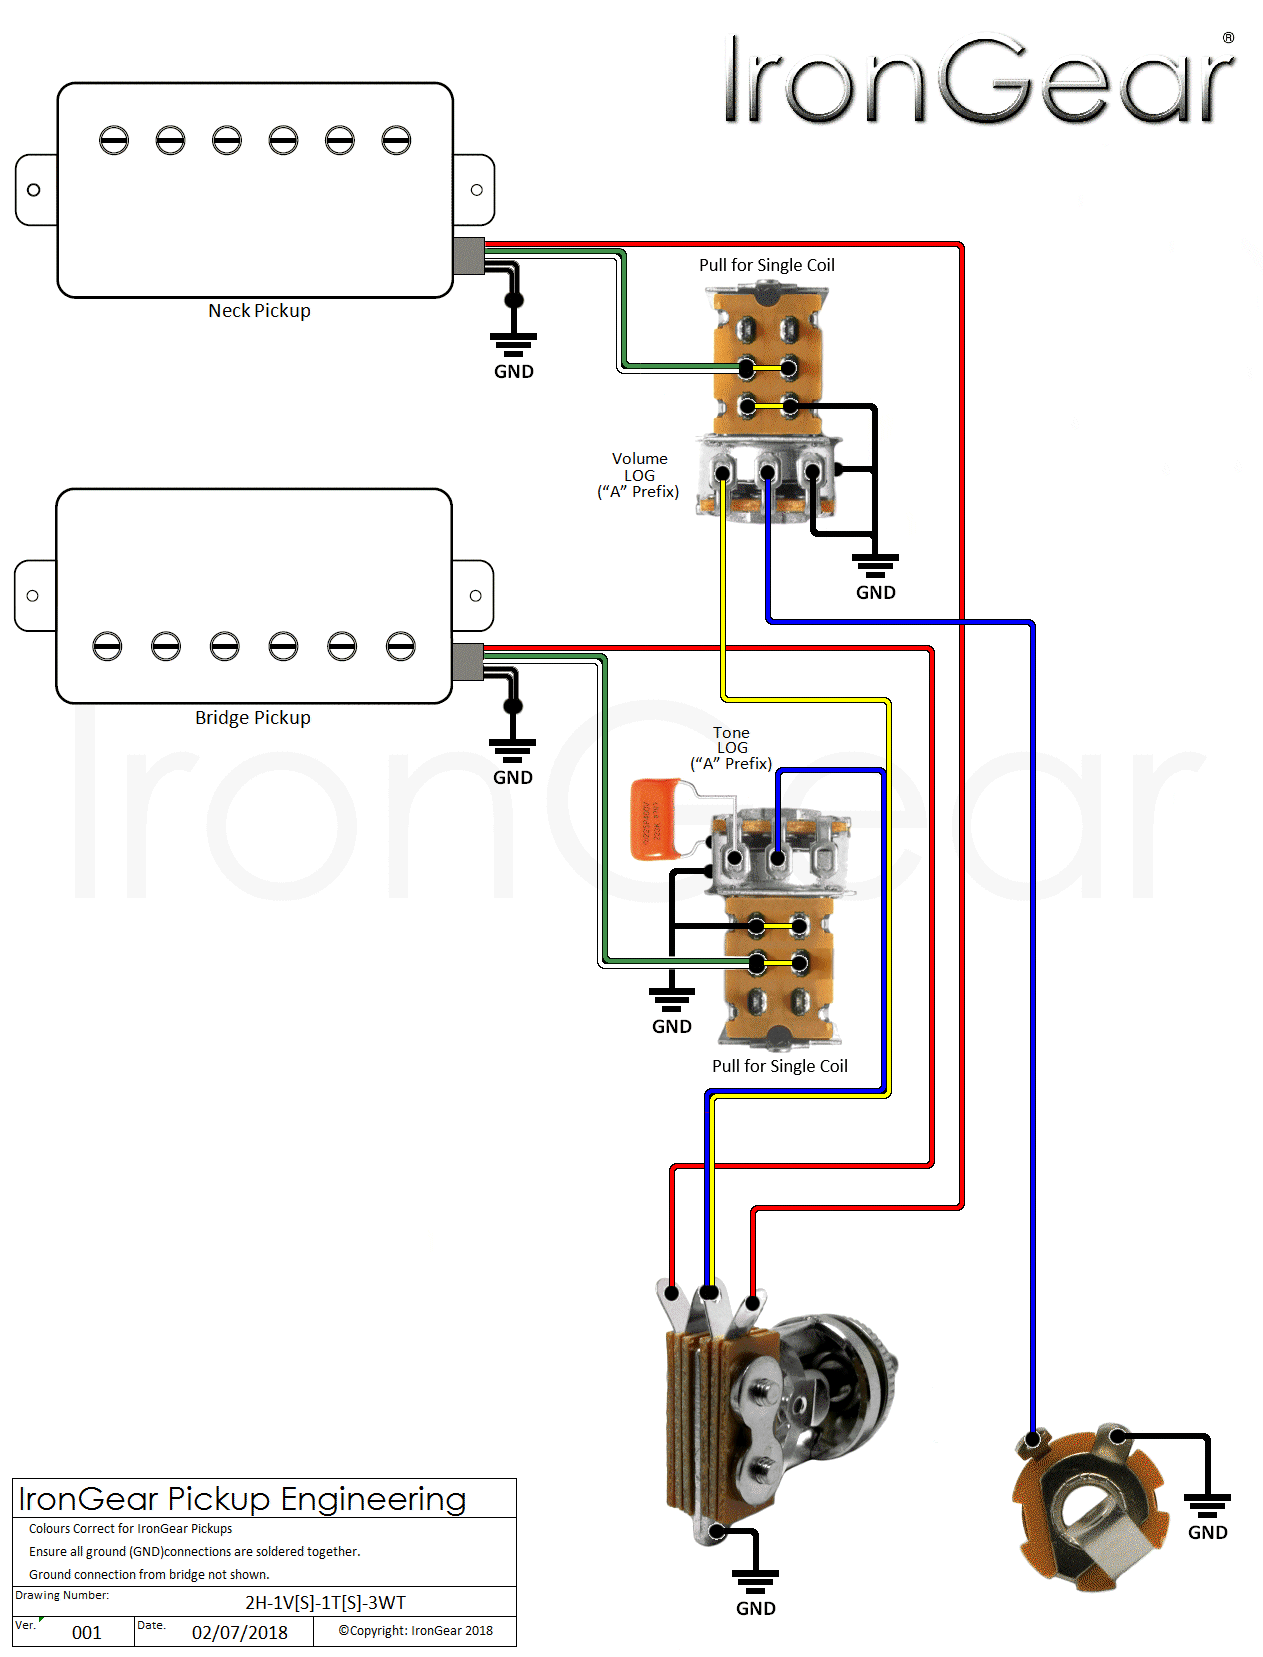 Wiring Diagram Strat Pickups 1 & 3 In Parallel With Switch from www.irongear.co.uk